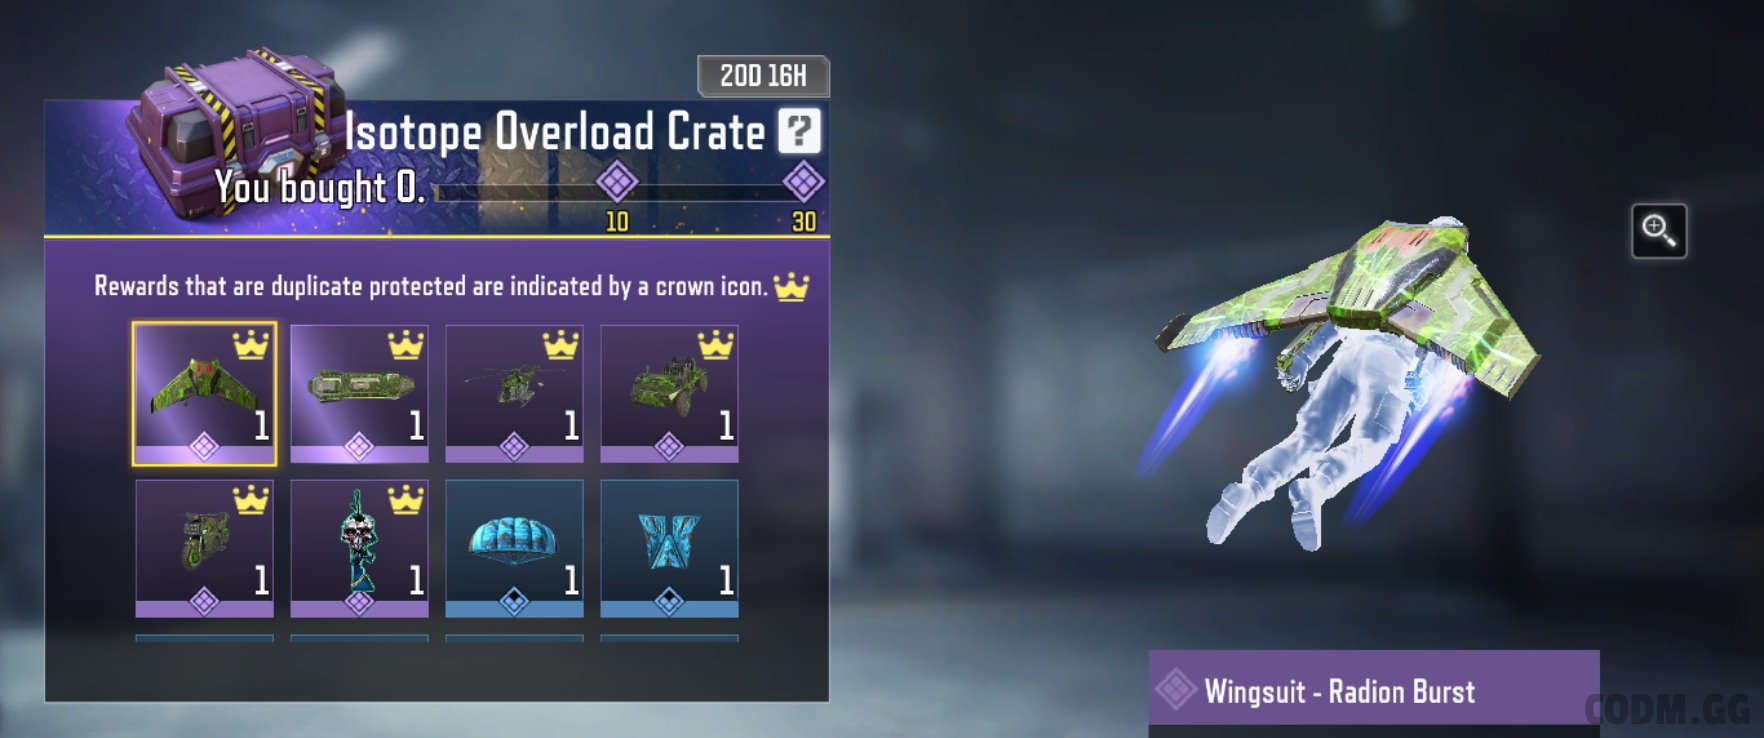 Isotope Overload Crate now available